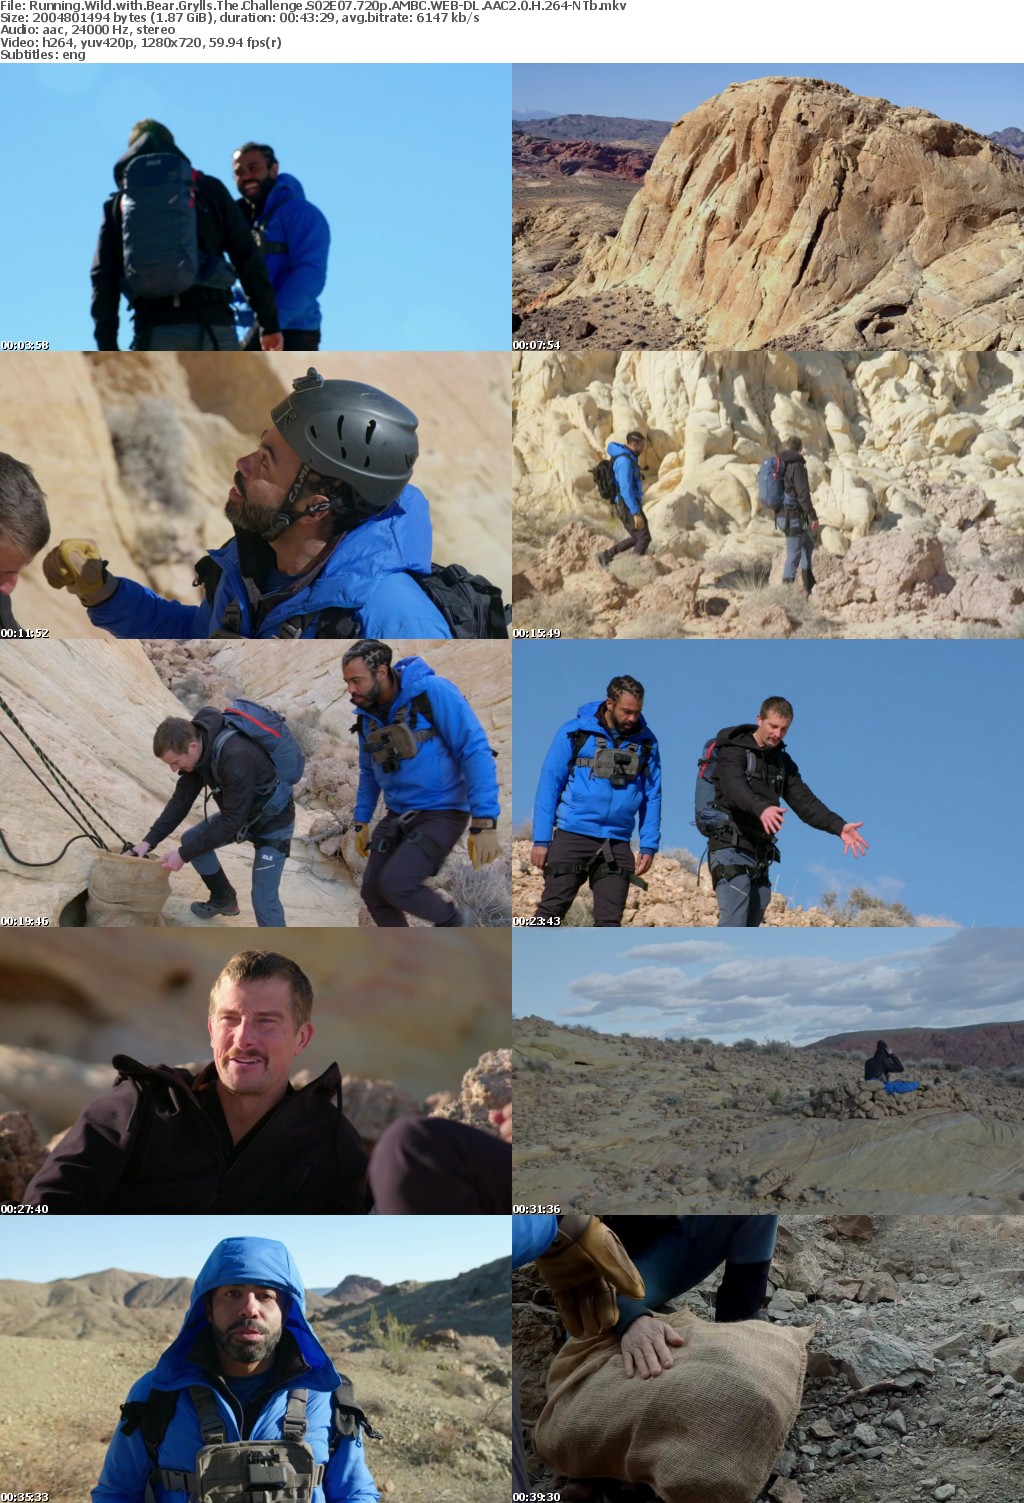 Running Wild with Bear Grylls The Challenge S02E07 720p AMBC WEB-DL AAC2 0 H 264-NTb